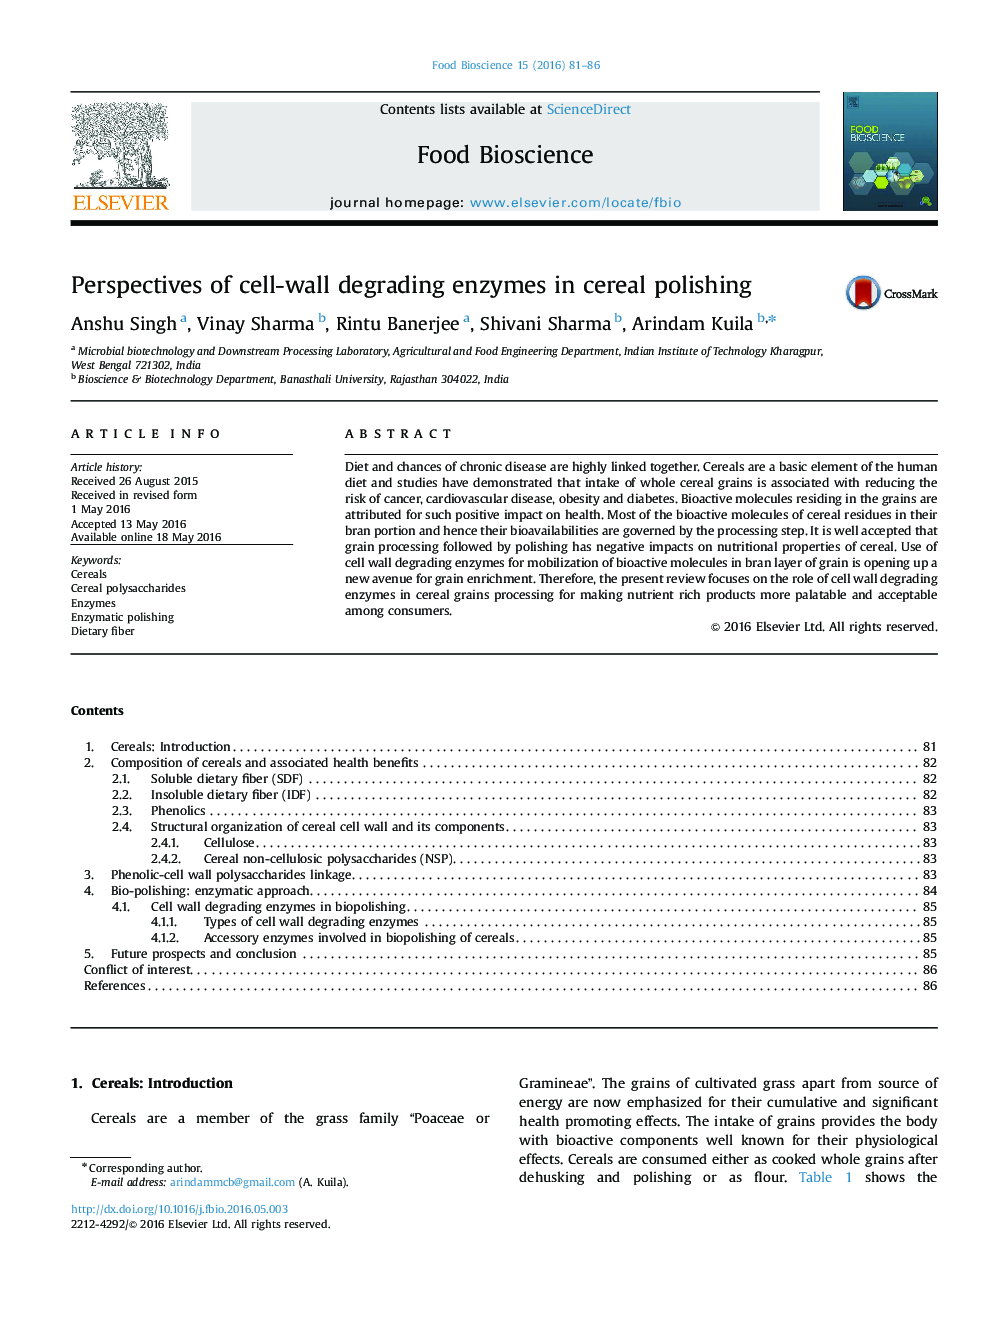 Perspectives of cell-wall degrading enzymes in cereal polishing